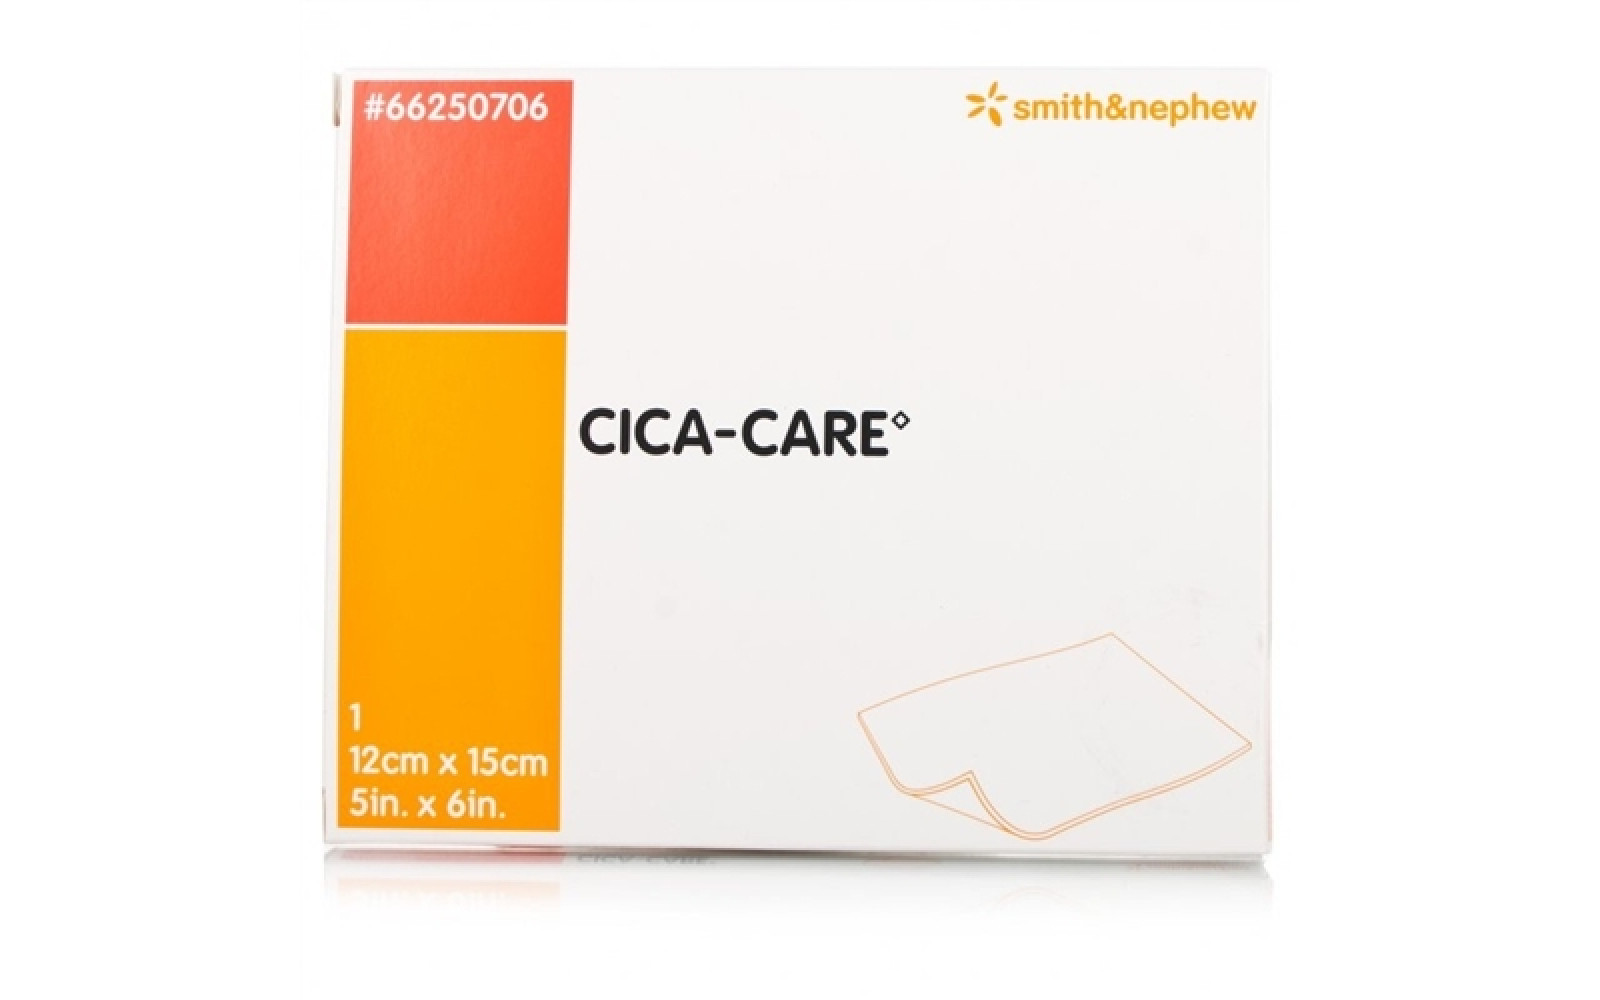 Self-Adhesive Silicone Gel Sheets CICA-CARE (Smith+Nephew)